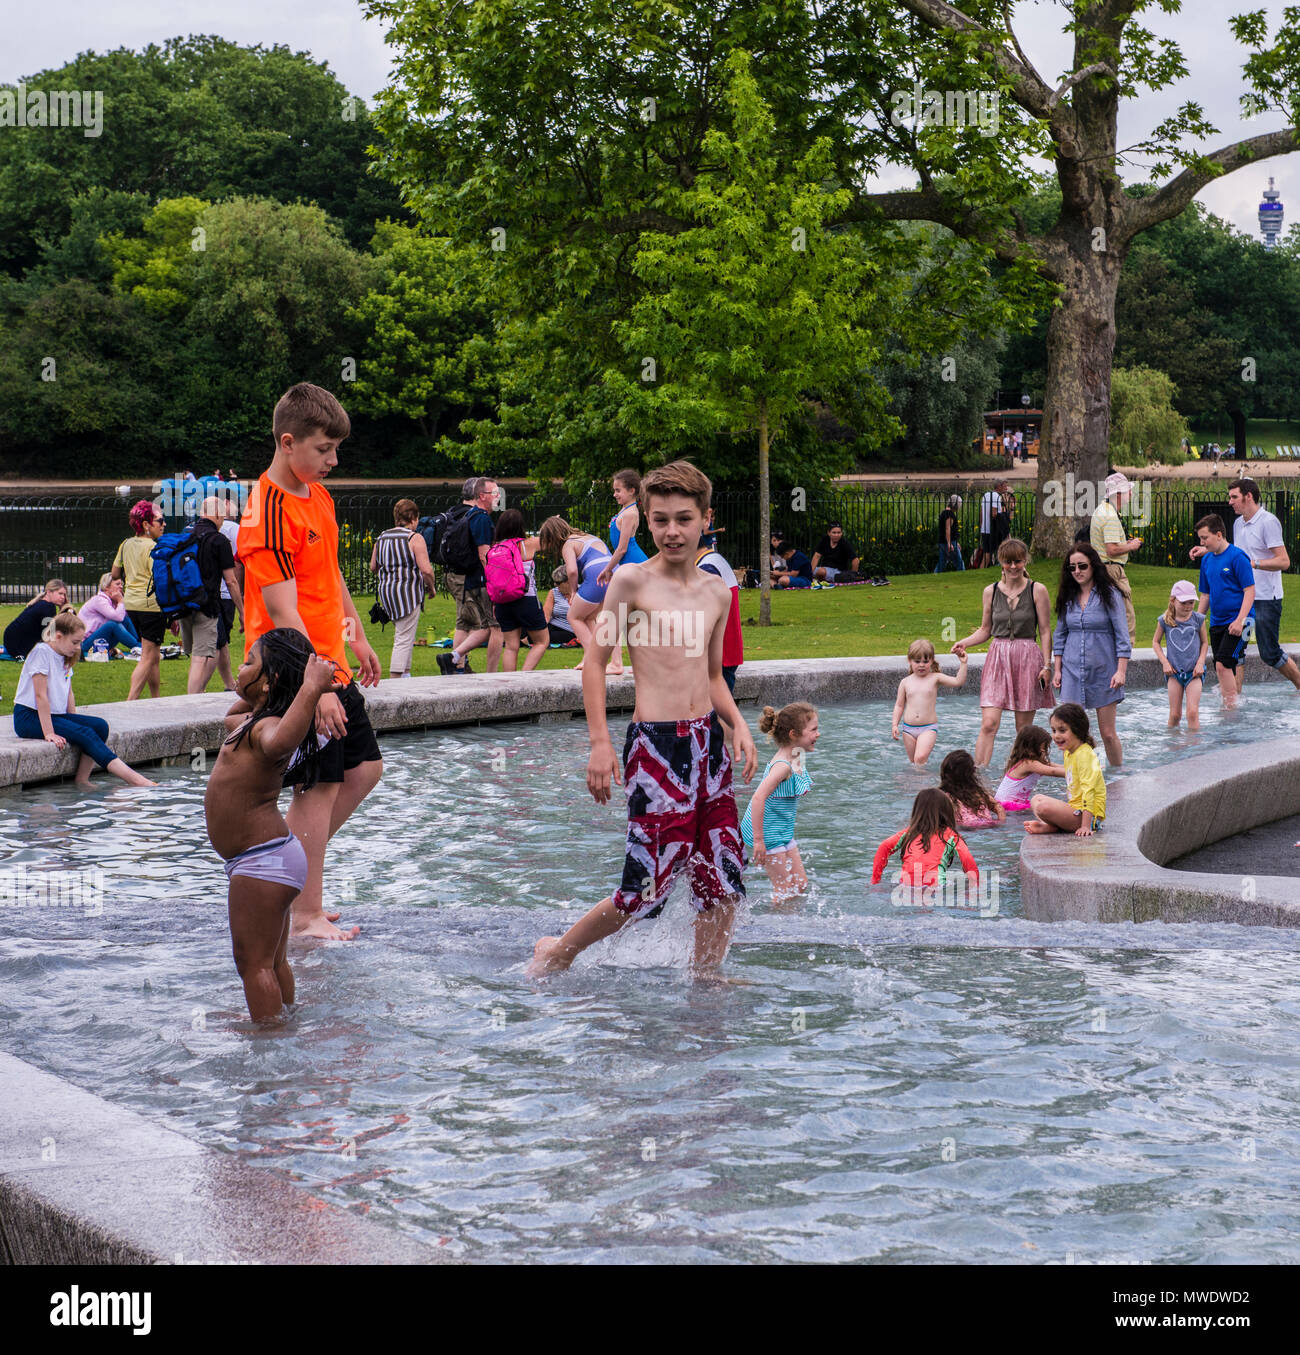 London, UK. 1st Jun, 2018. UK Weather: Cloudy day at Serpentine lake, Hyde Park.  A boy wearing British flag swim trunks smiles at the camera while playing in the water at the Princess Diana Memorial in Hyde Park. Credit: Ernesto Rogata/Alamy Live News. Stock Photo